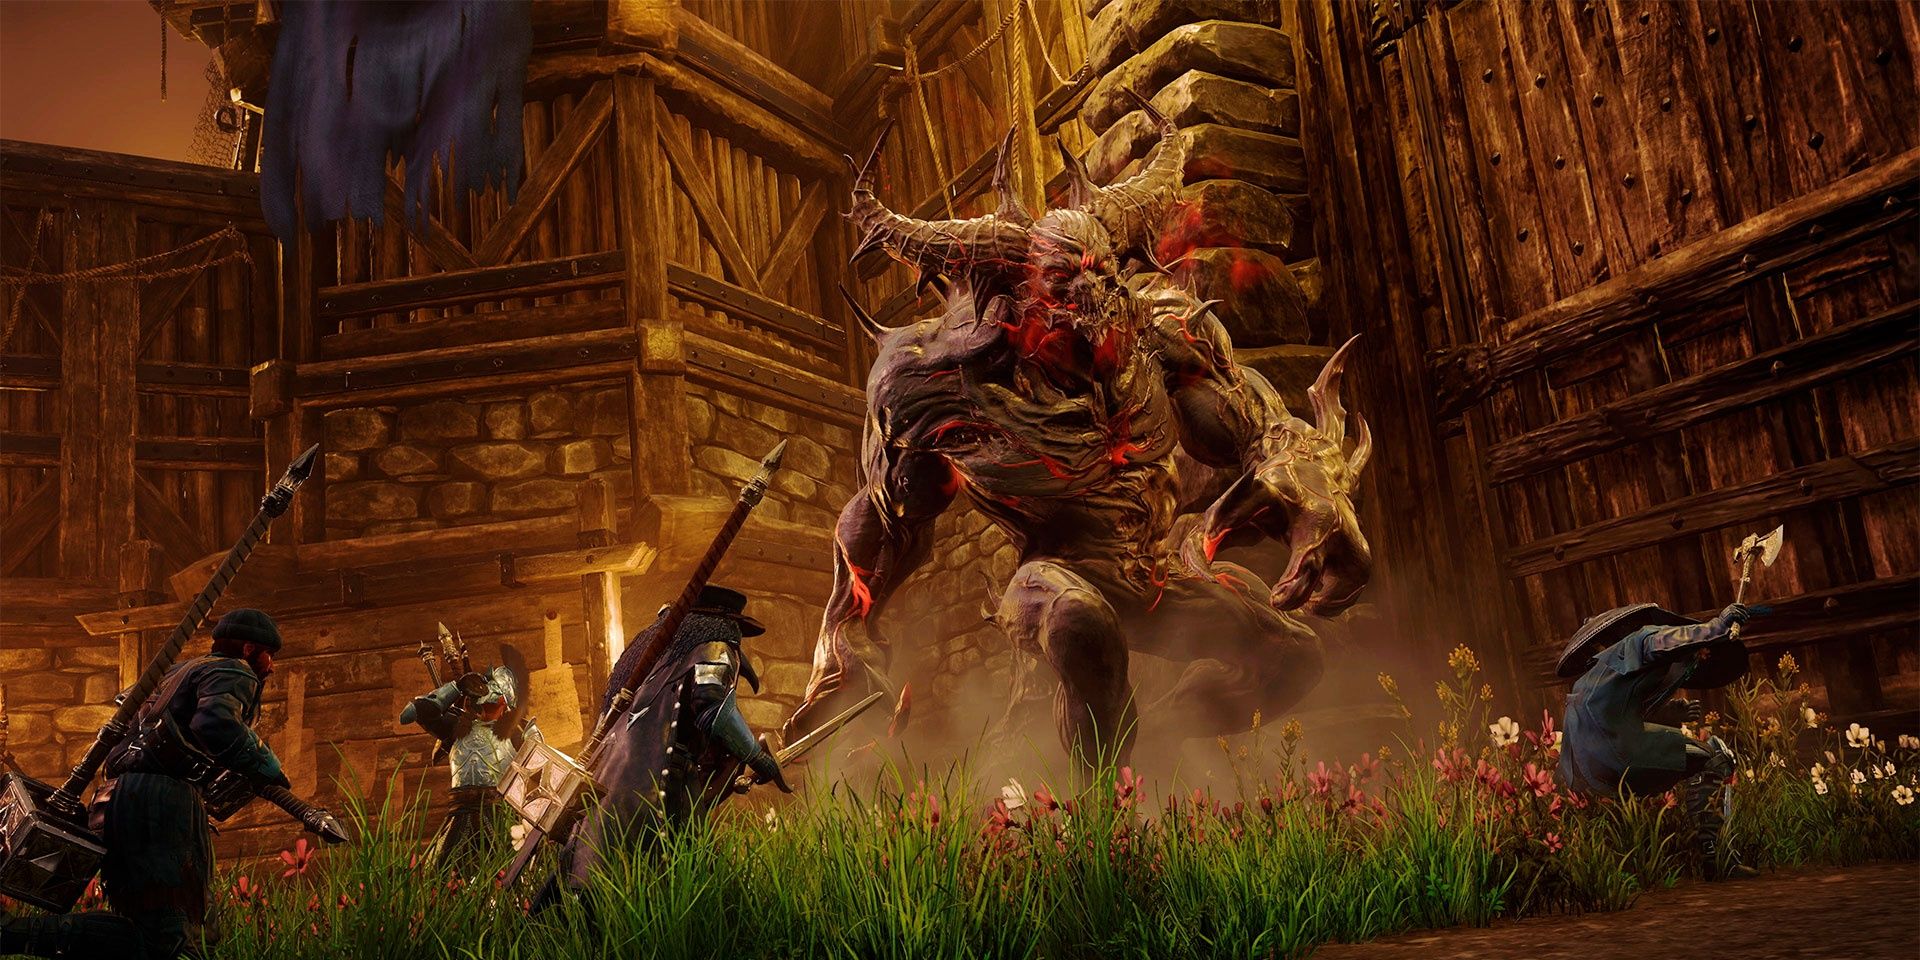 A screenshot showing some players fighting a monster in New World